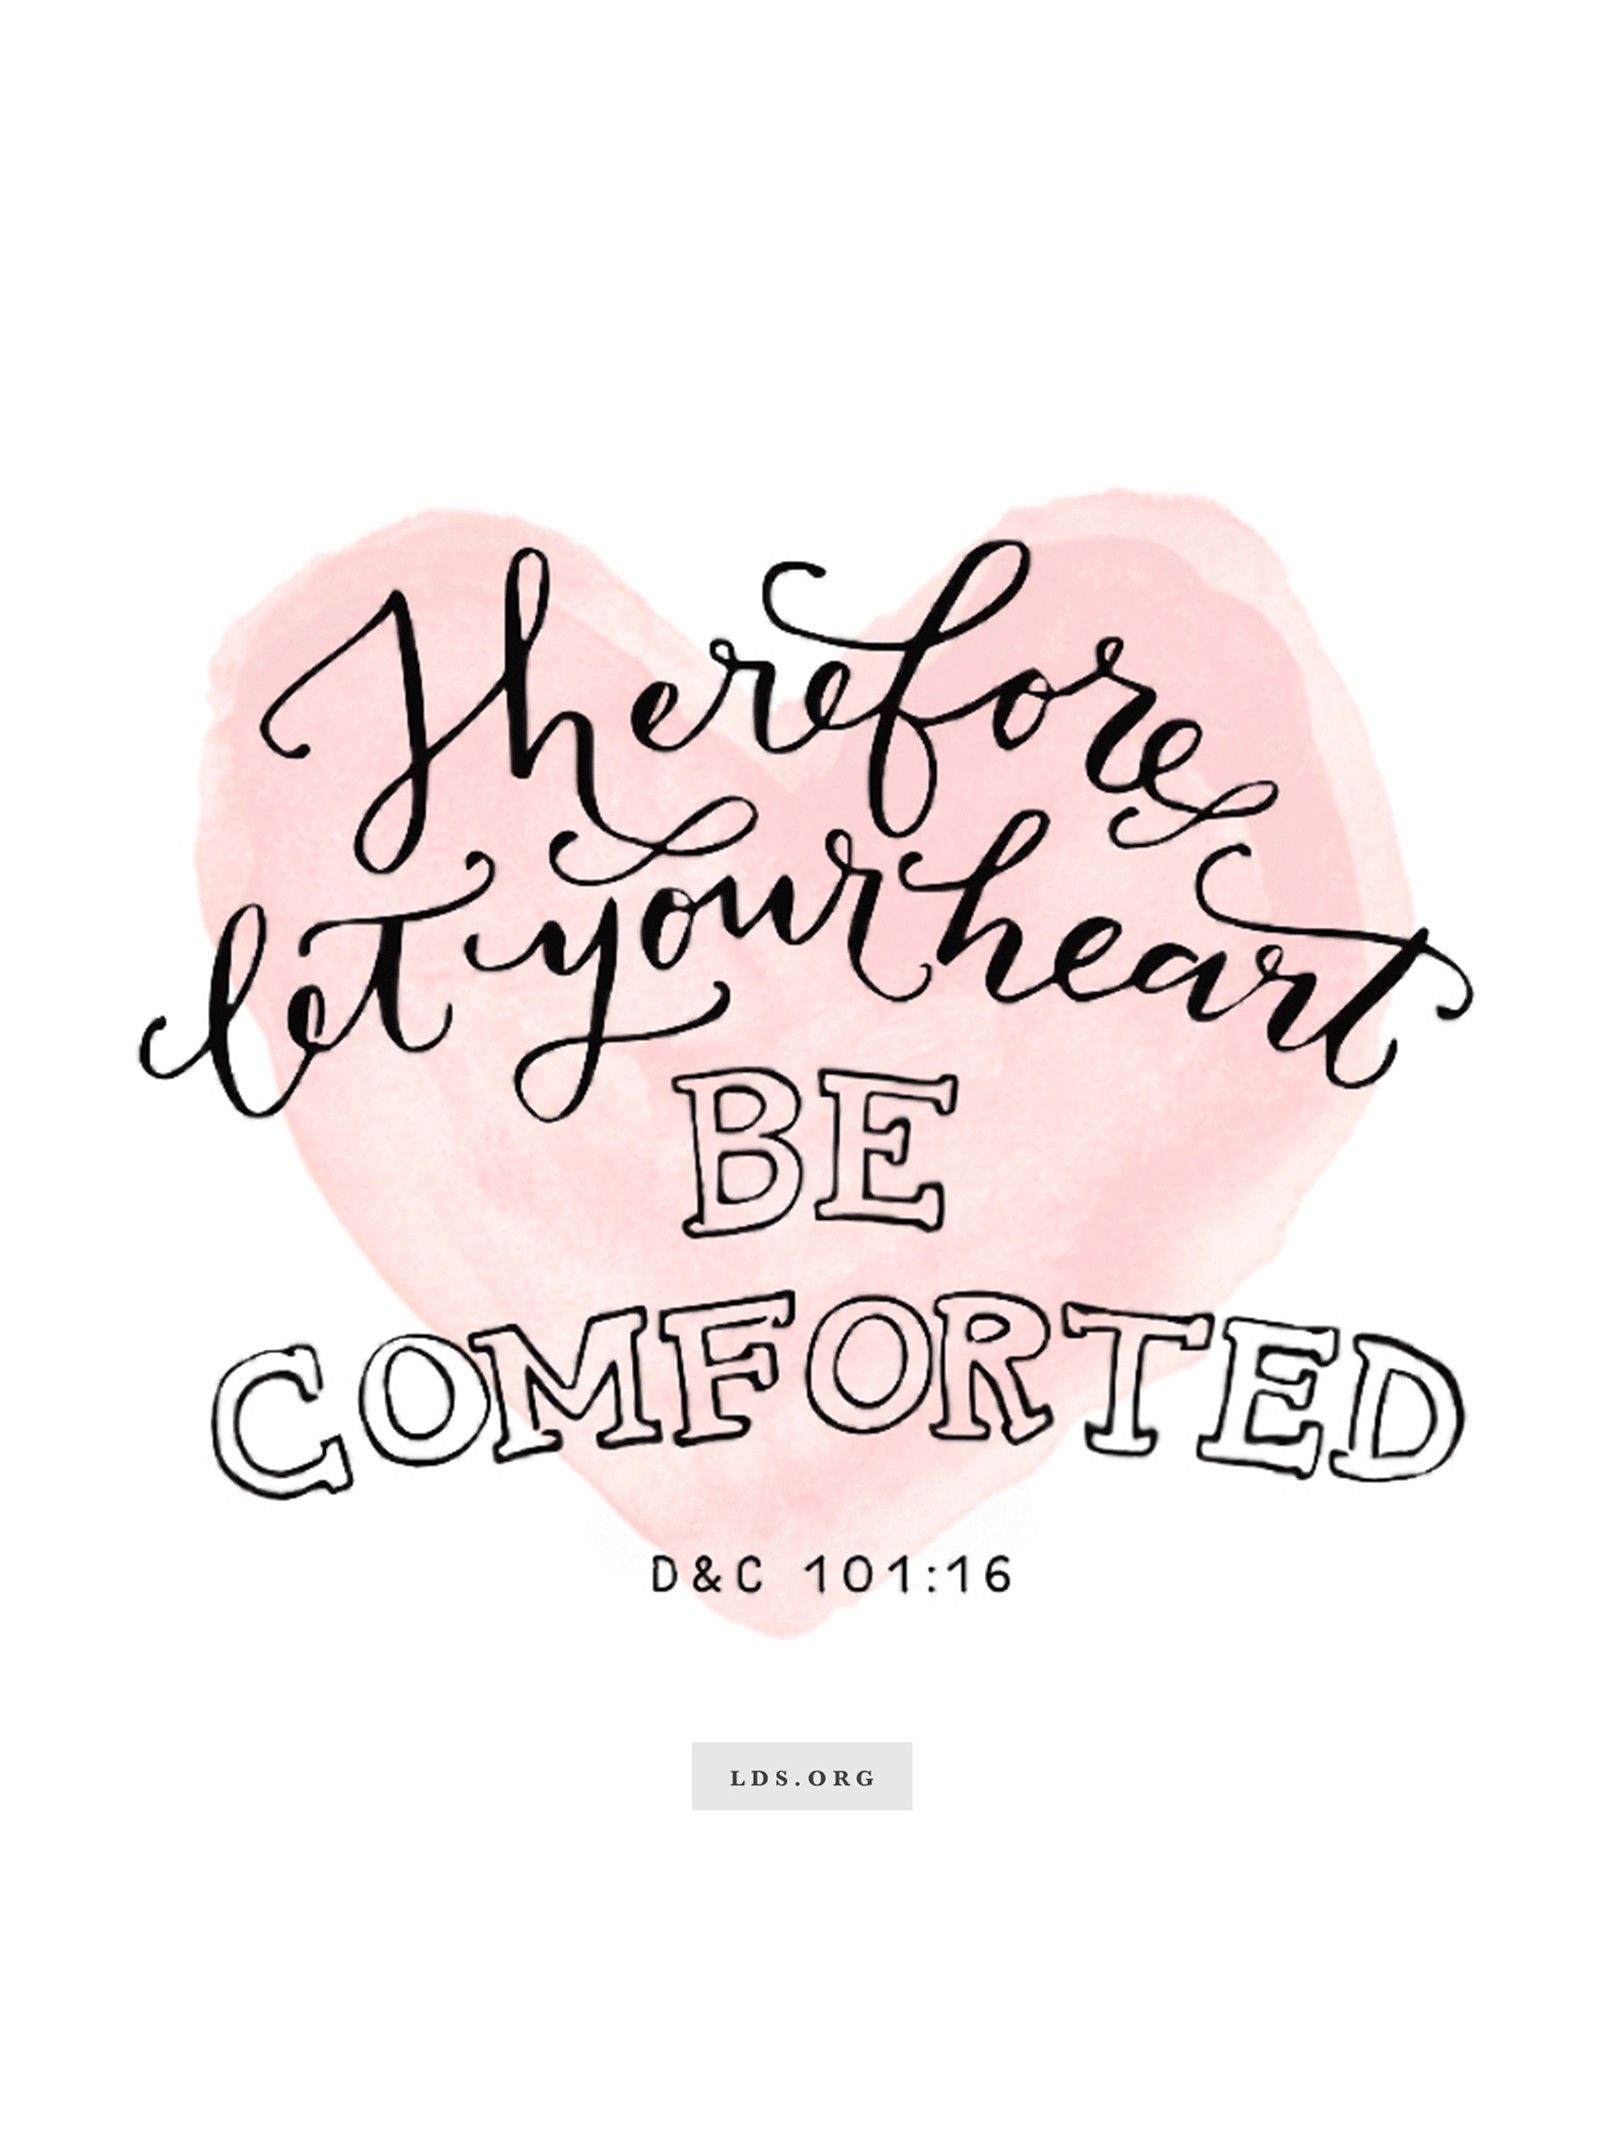 “Therefore let your heart be comforted.”—D&C 101:16. Created by Jenae Nelson.